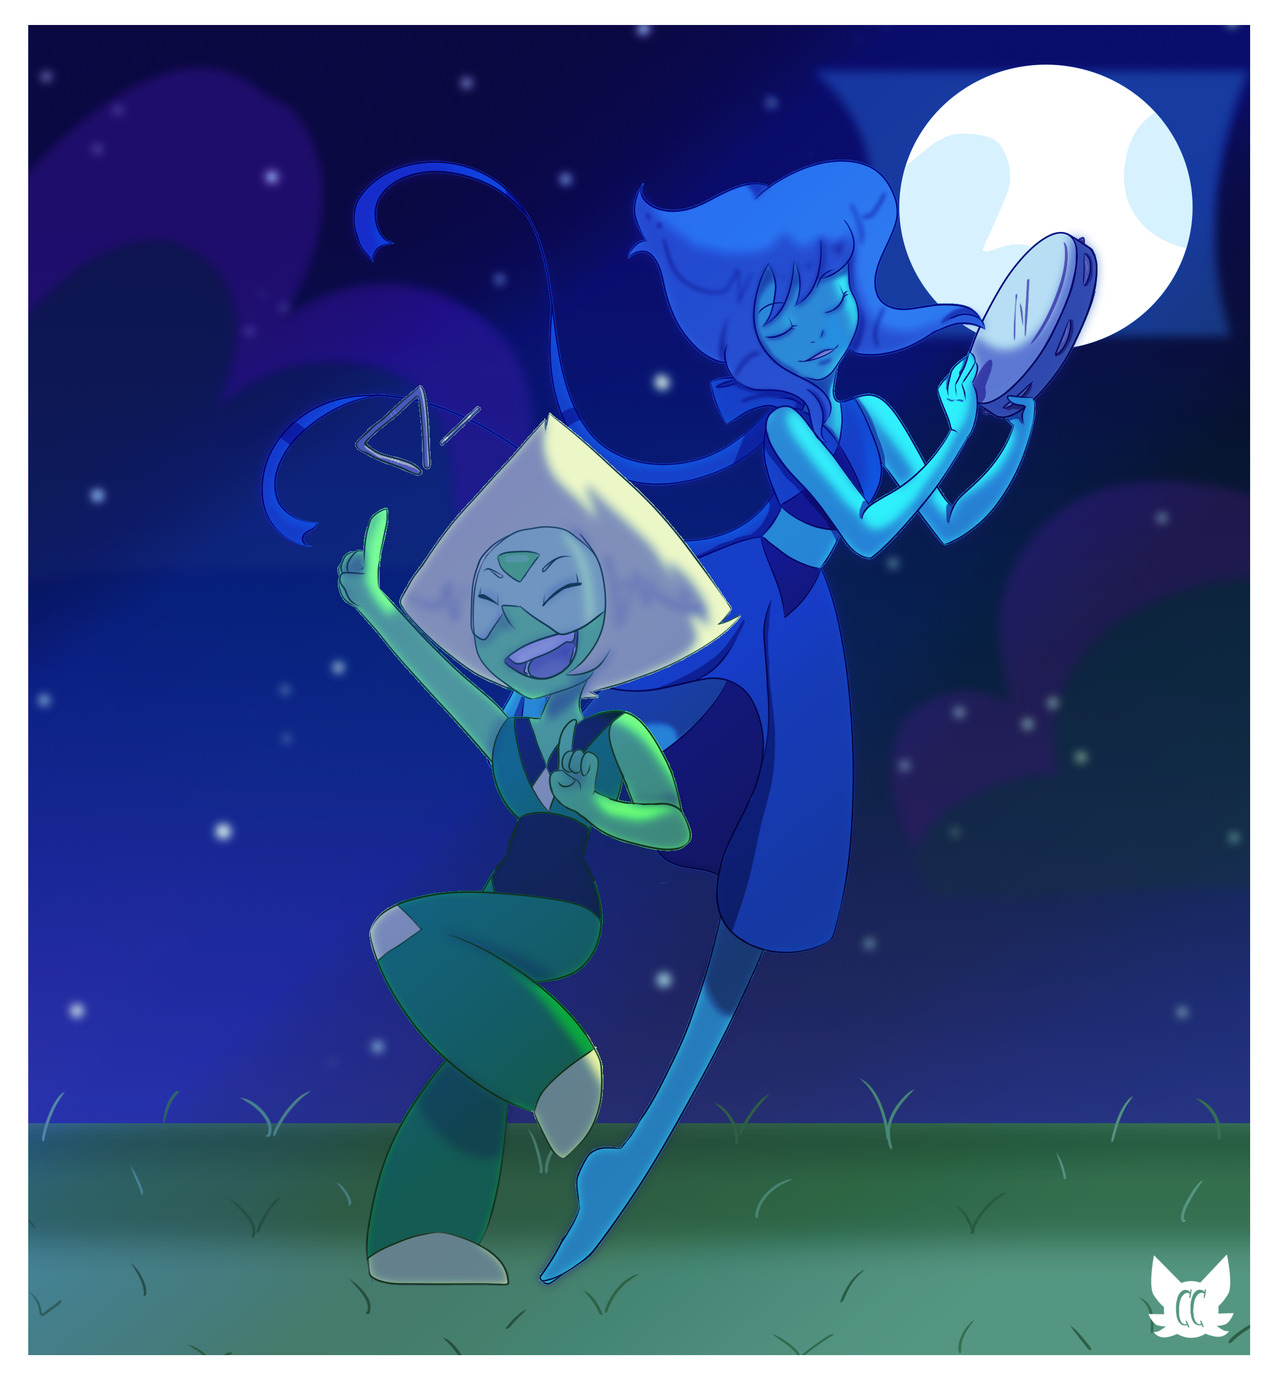 Duo Dance Decided I wanted to make a print to sell at cons and thought it would be fun to add Peridot into the piece. That scene where they’re dancing is just so cute.